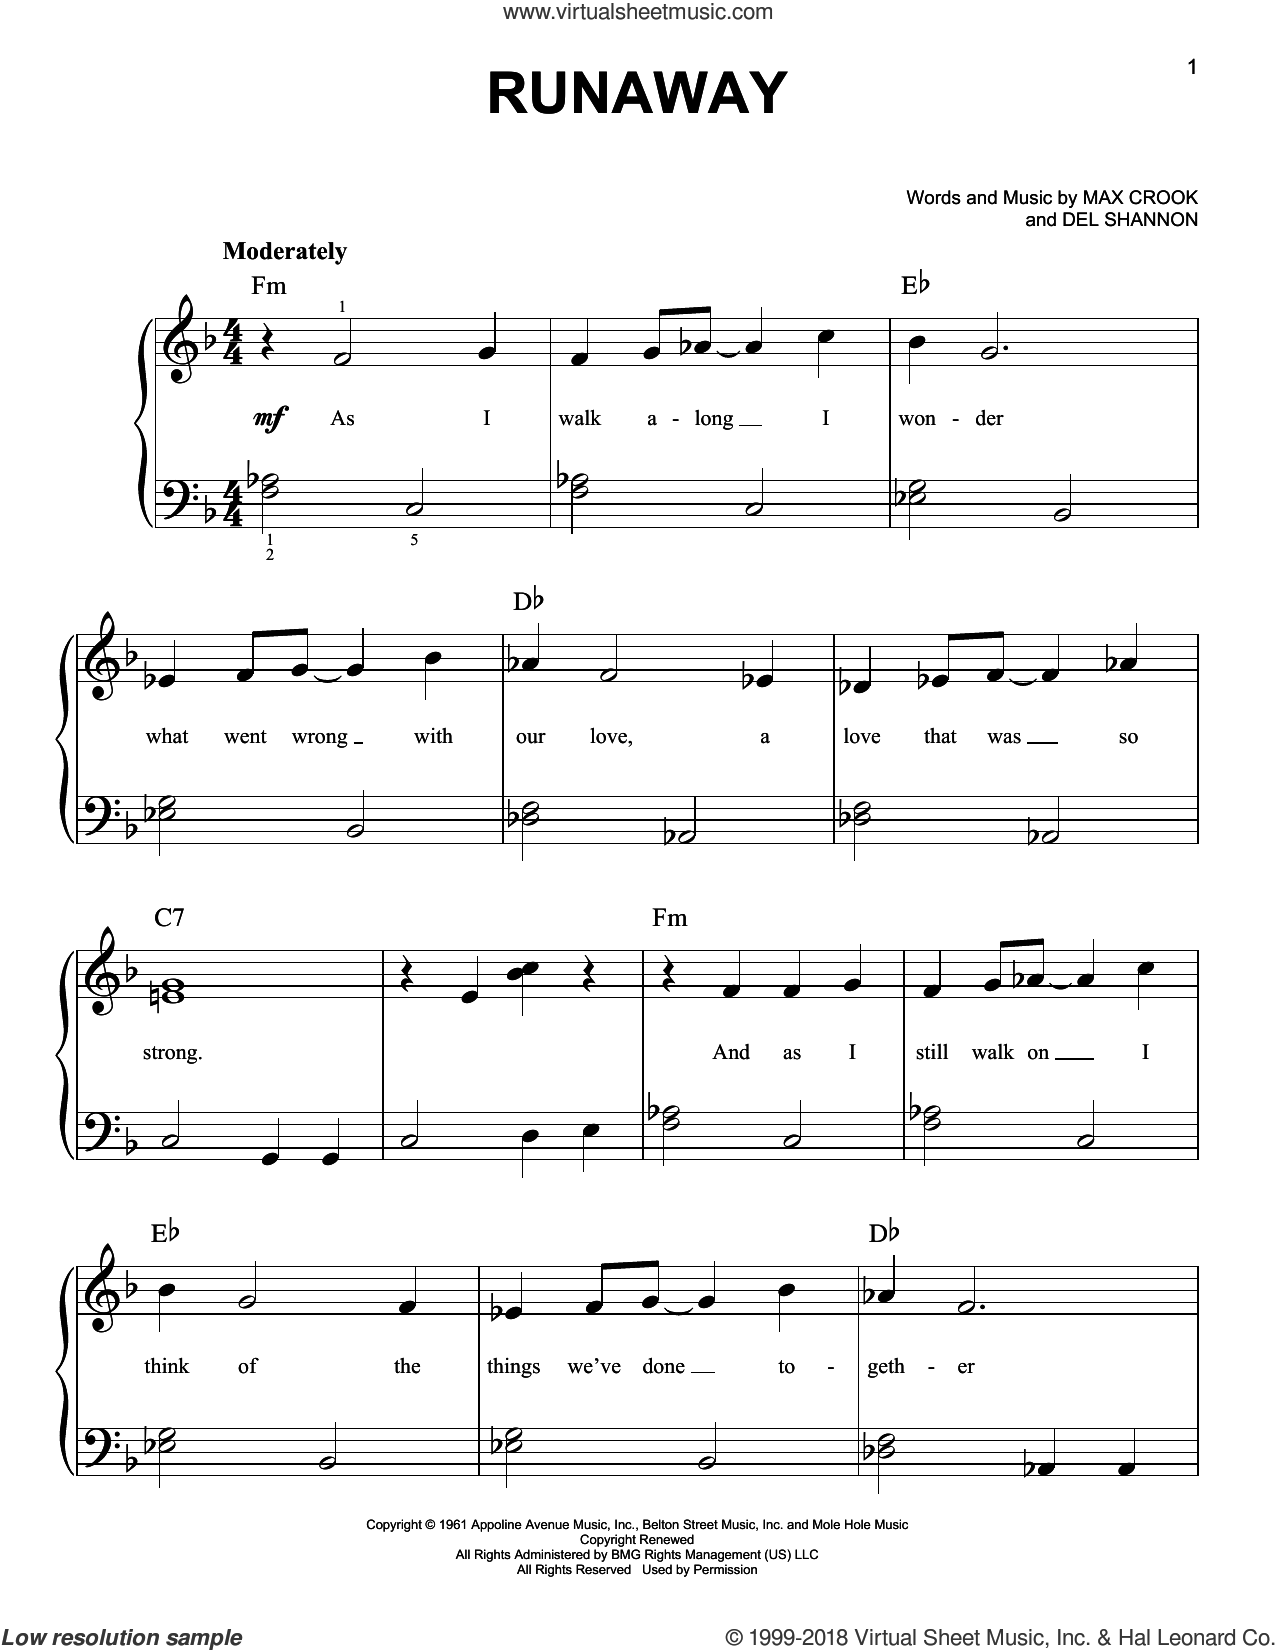 Shannon - Runaway sheet music for piano solo (PDF-interactive)